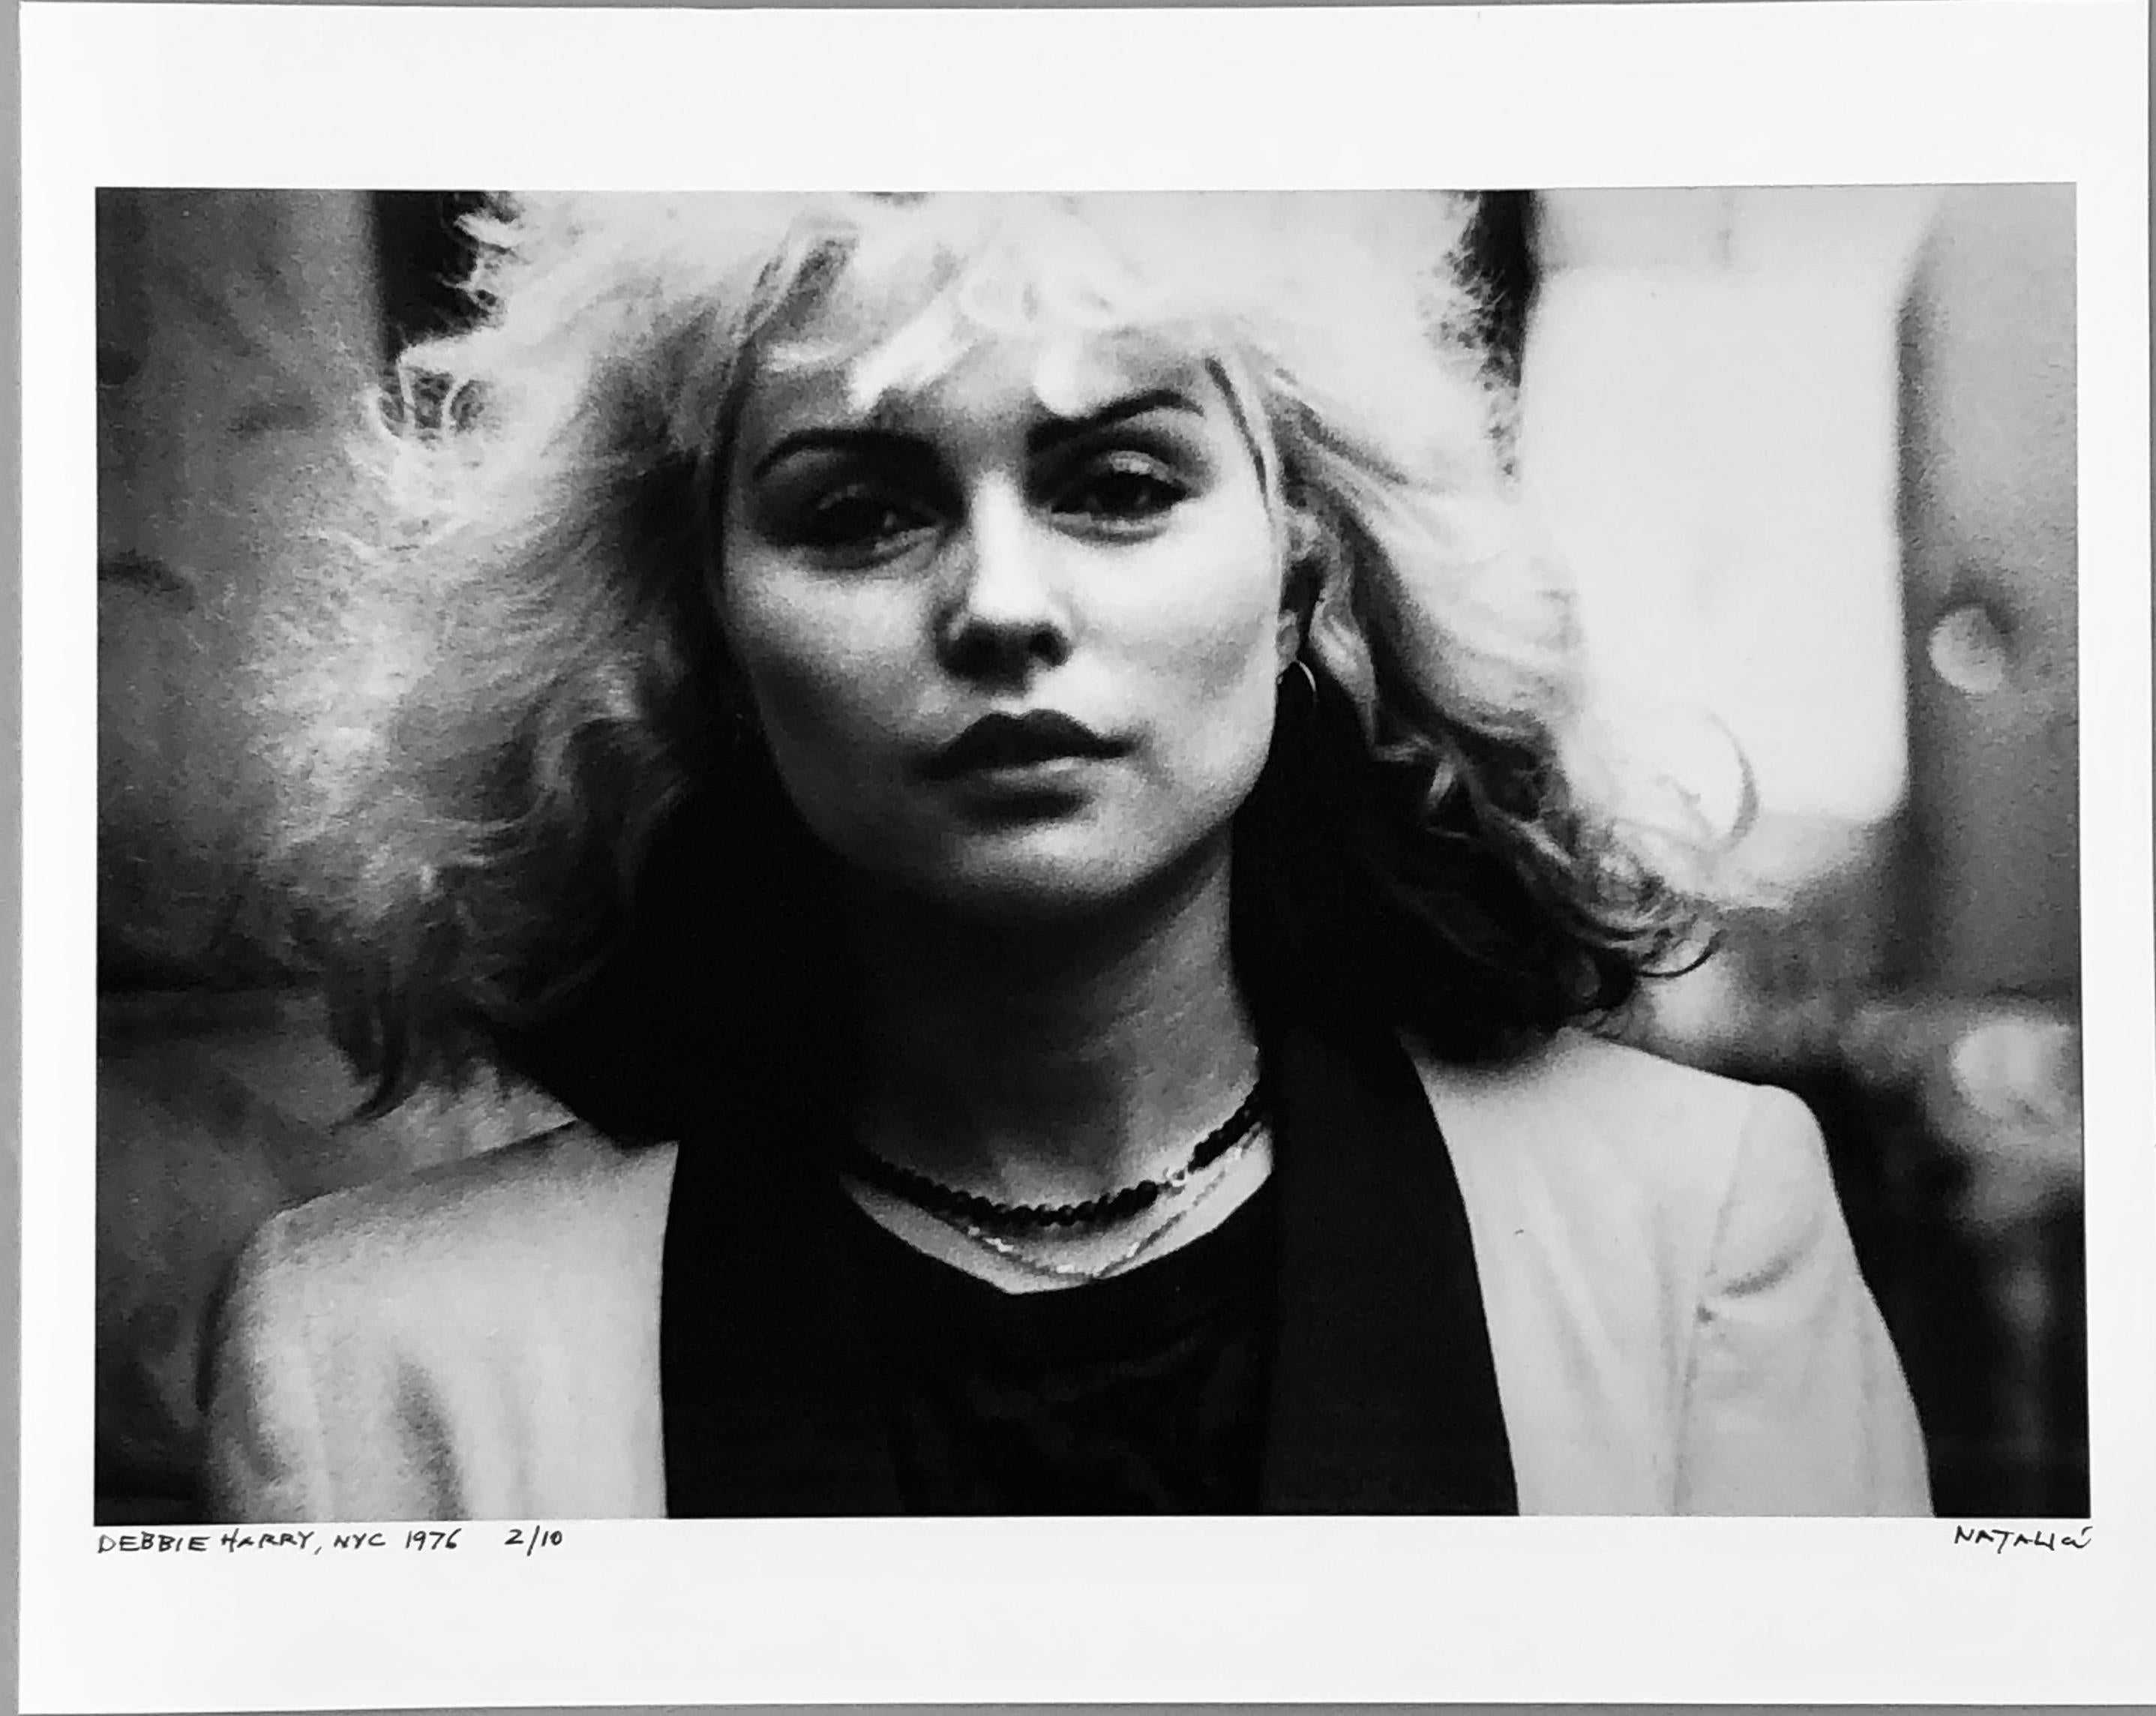 Debbie Harry photograph 'The Foreigner' 1977 (Blondie)  - Photograph by Fernando Natalici